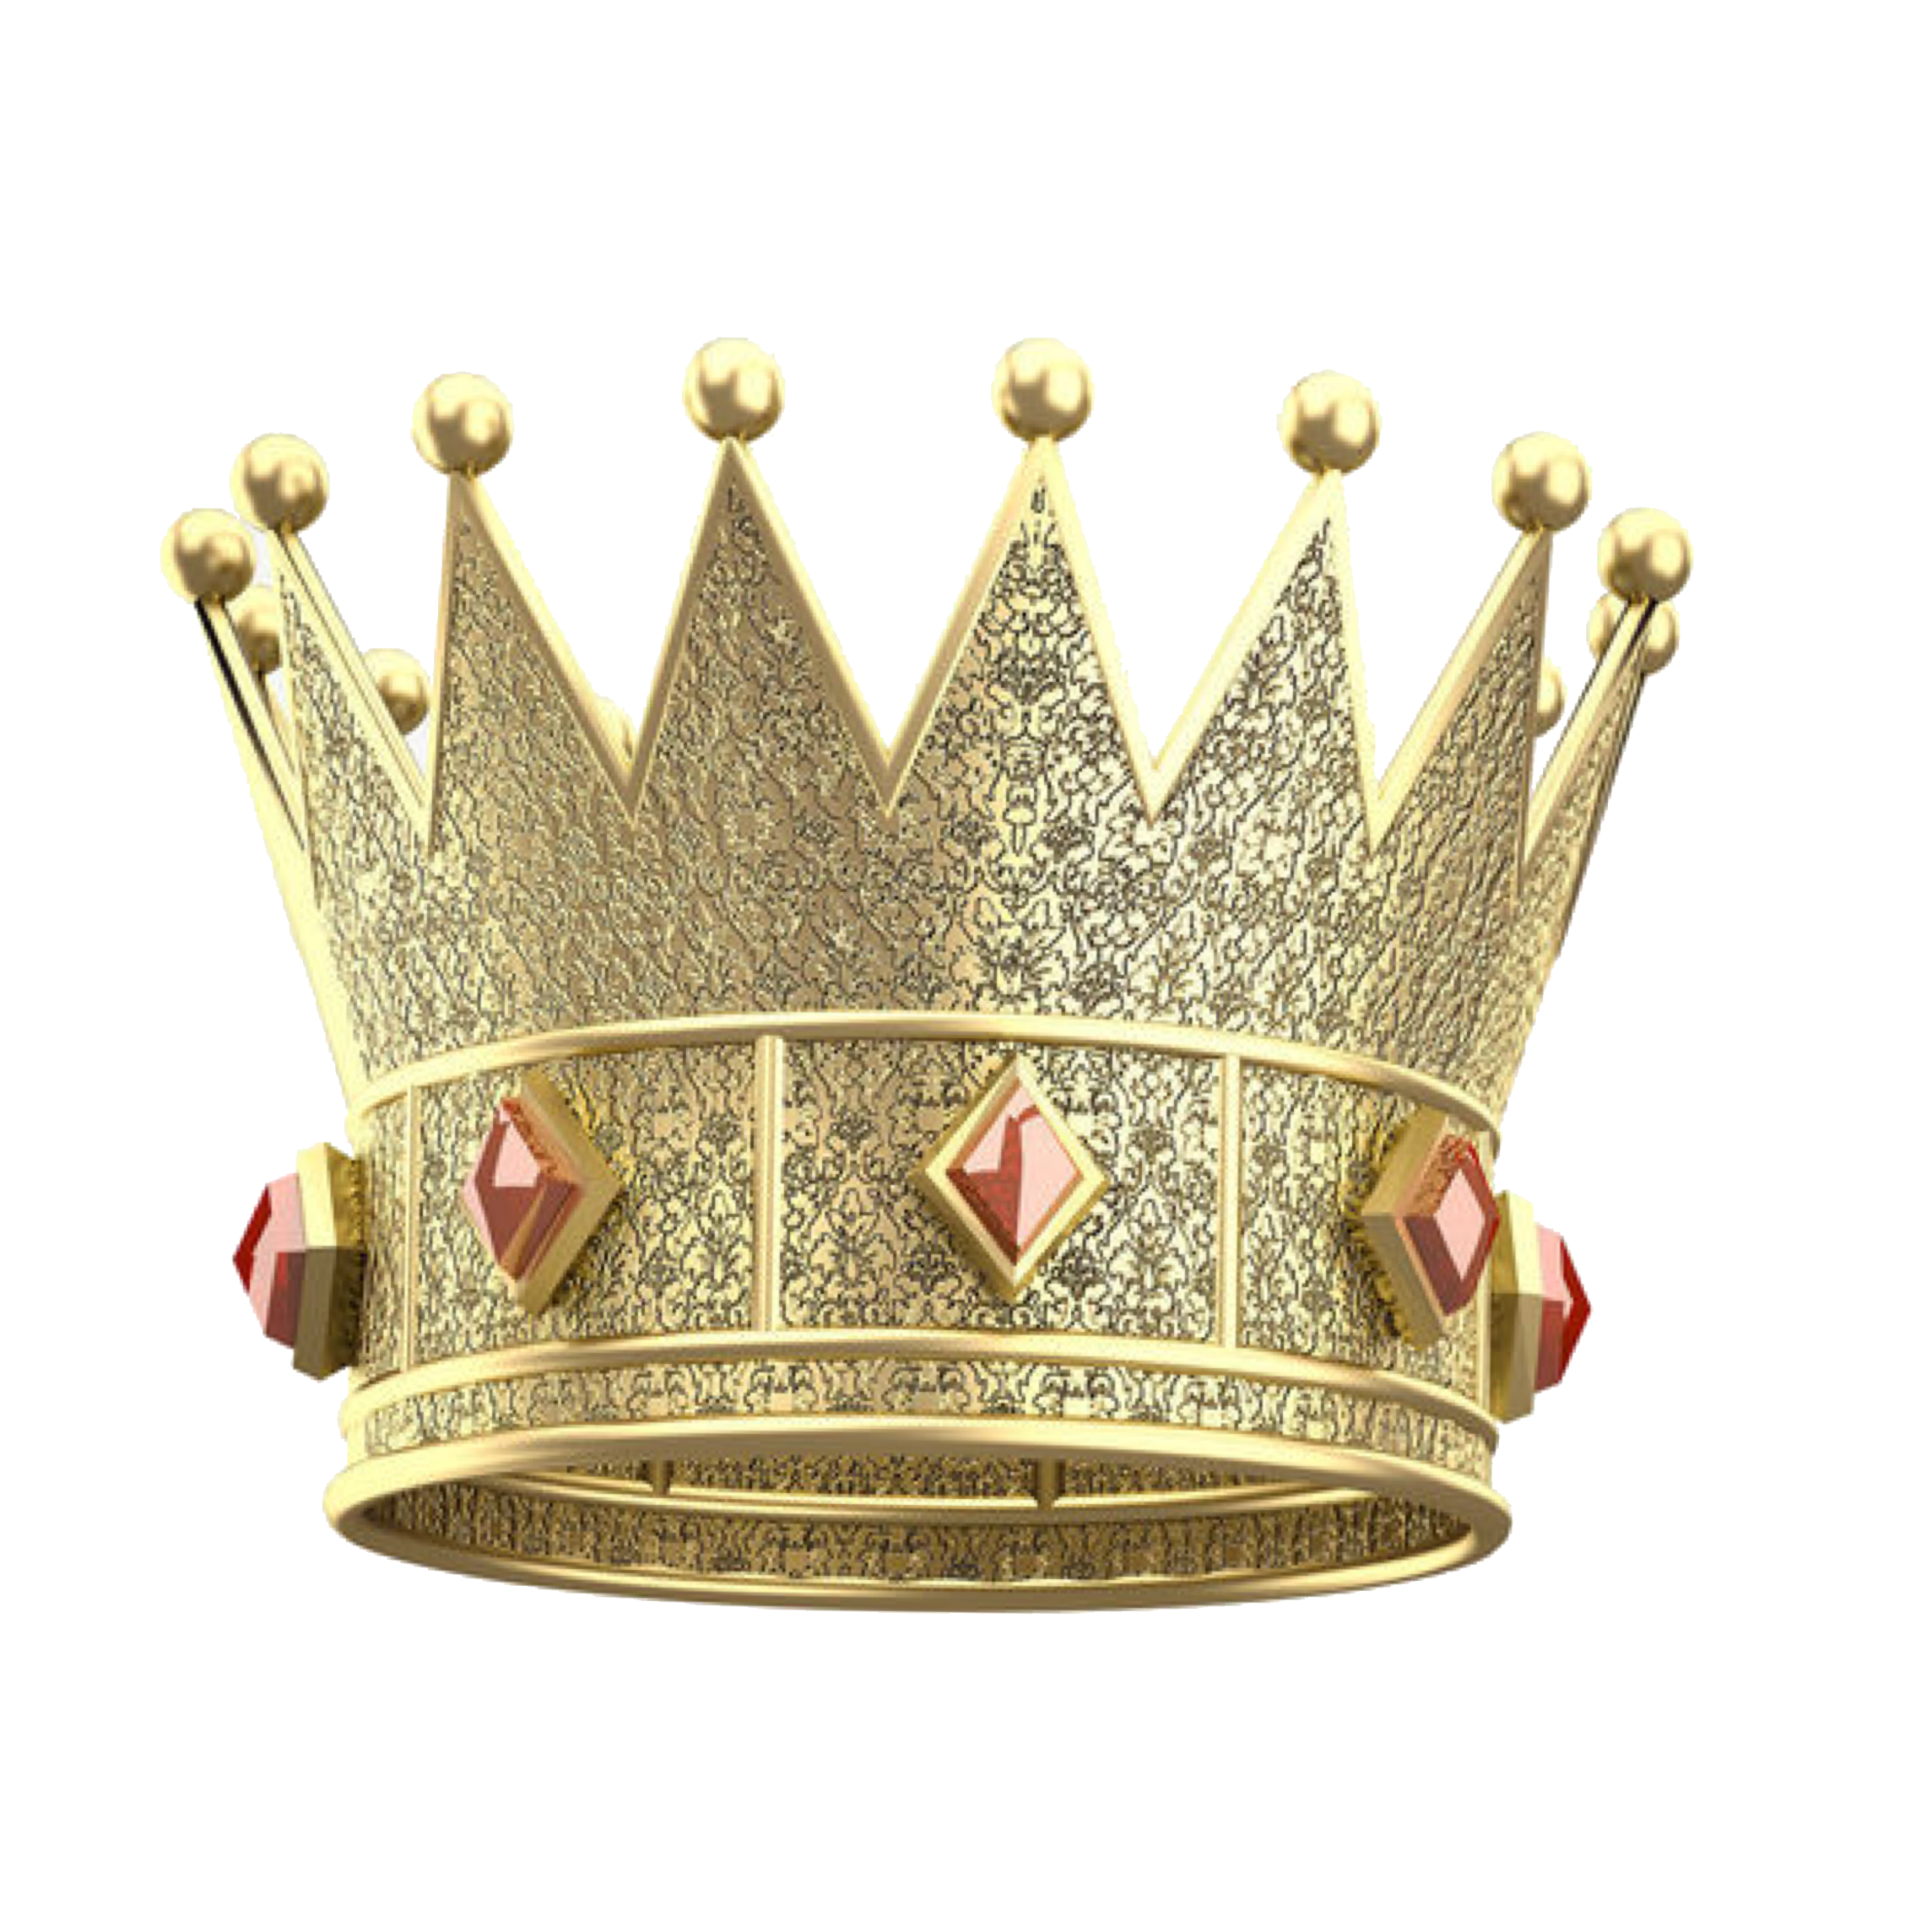 Crown Jewellery Gold Image King - crown png download - 2289*2289 - Free  Transparent Crown png Download. - Clip Art Library